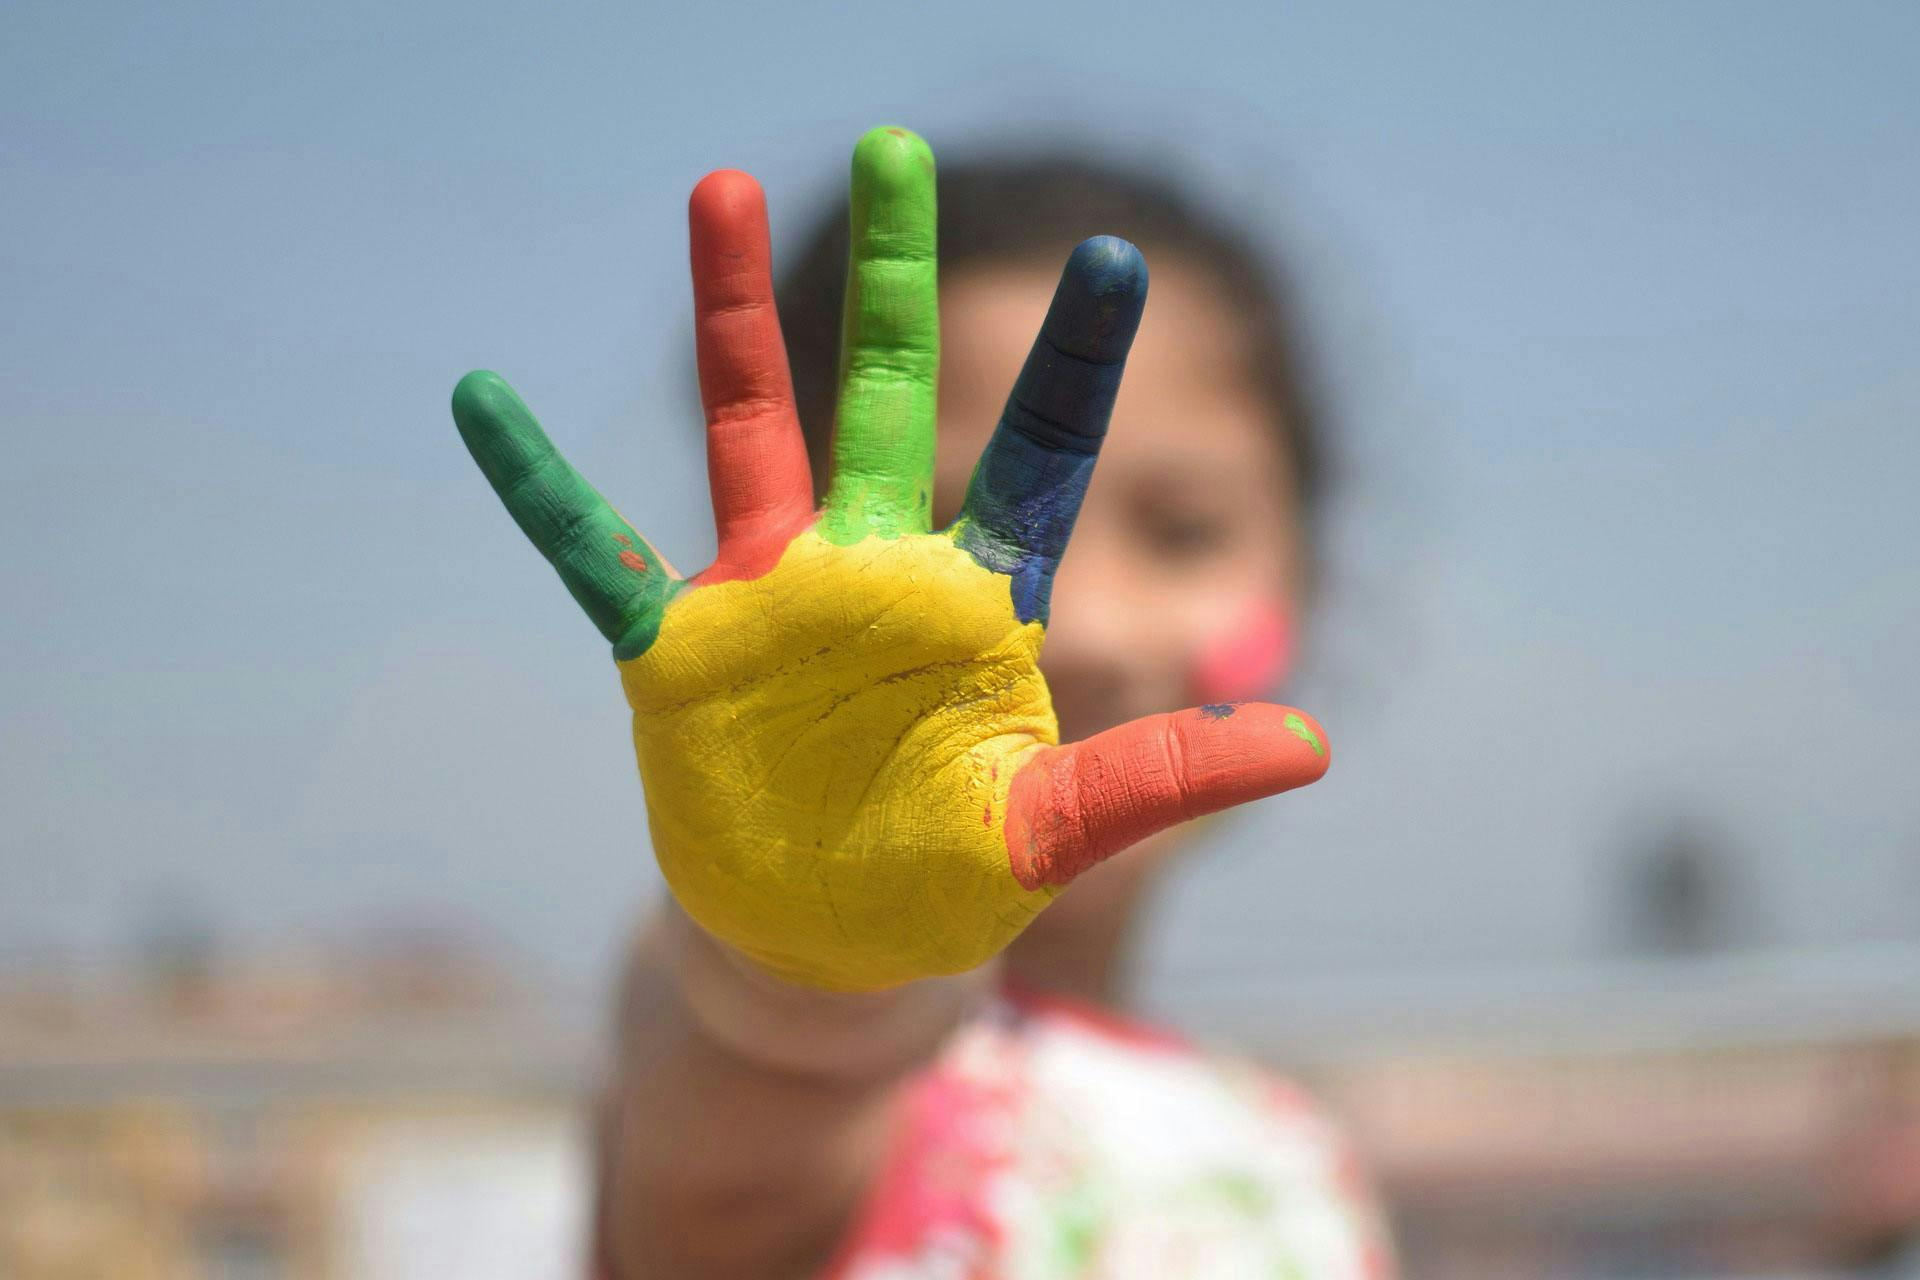 A hand painted in rainbow colors (red, green, yellow, blue) is outstretched towards the camera. A child blurred in the background forms the context on a sunny, outdoor day.